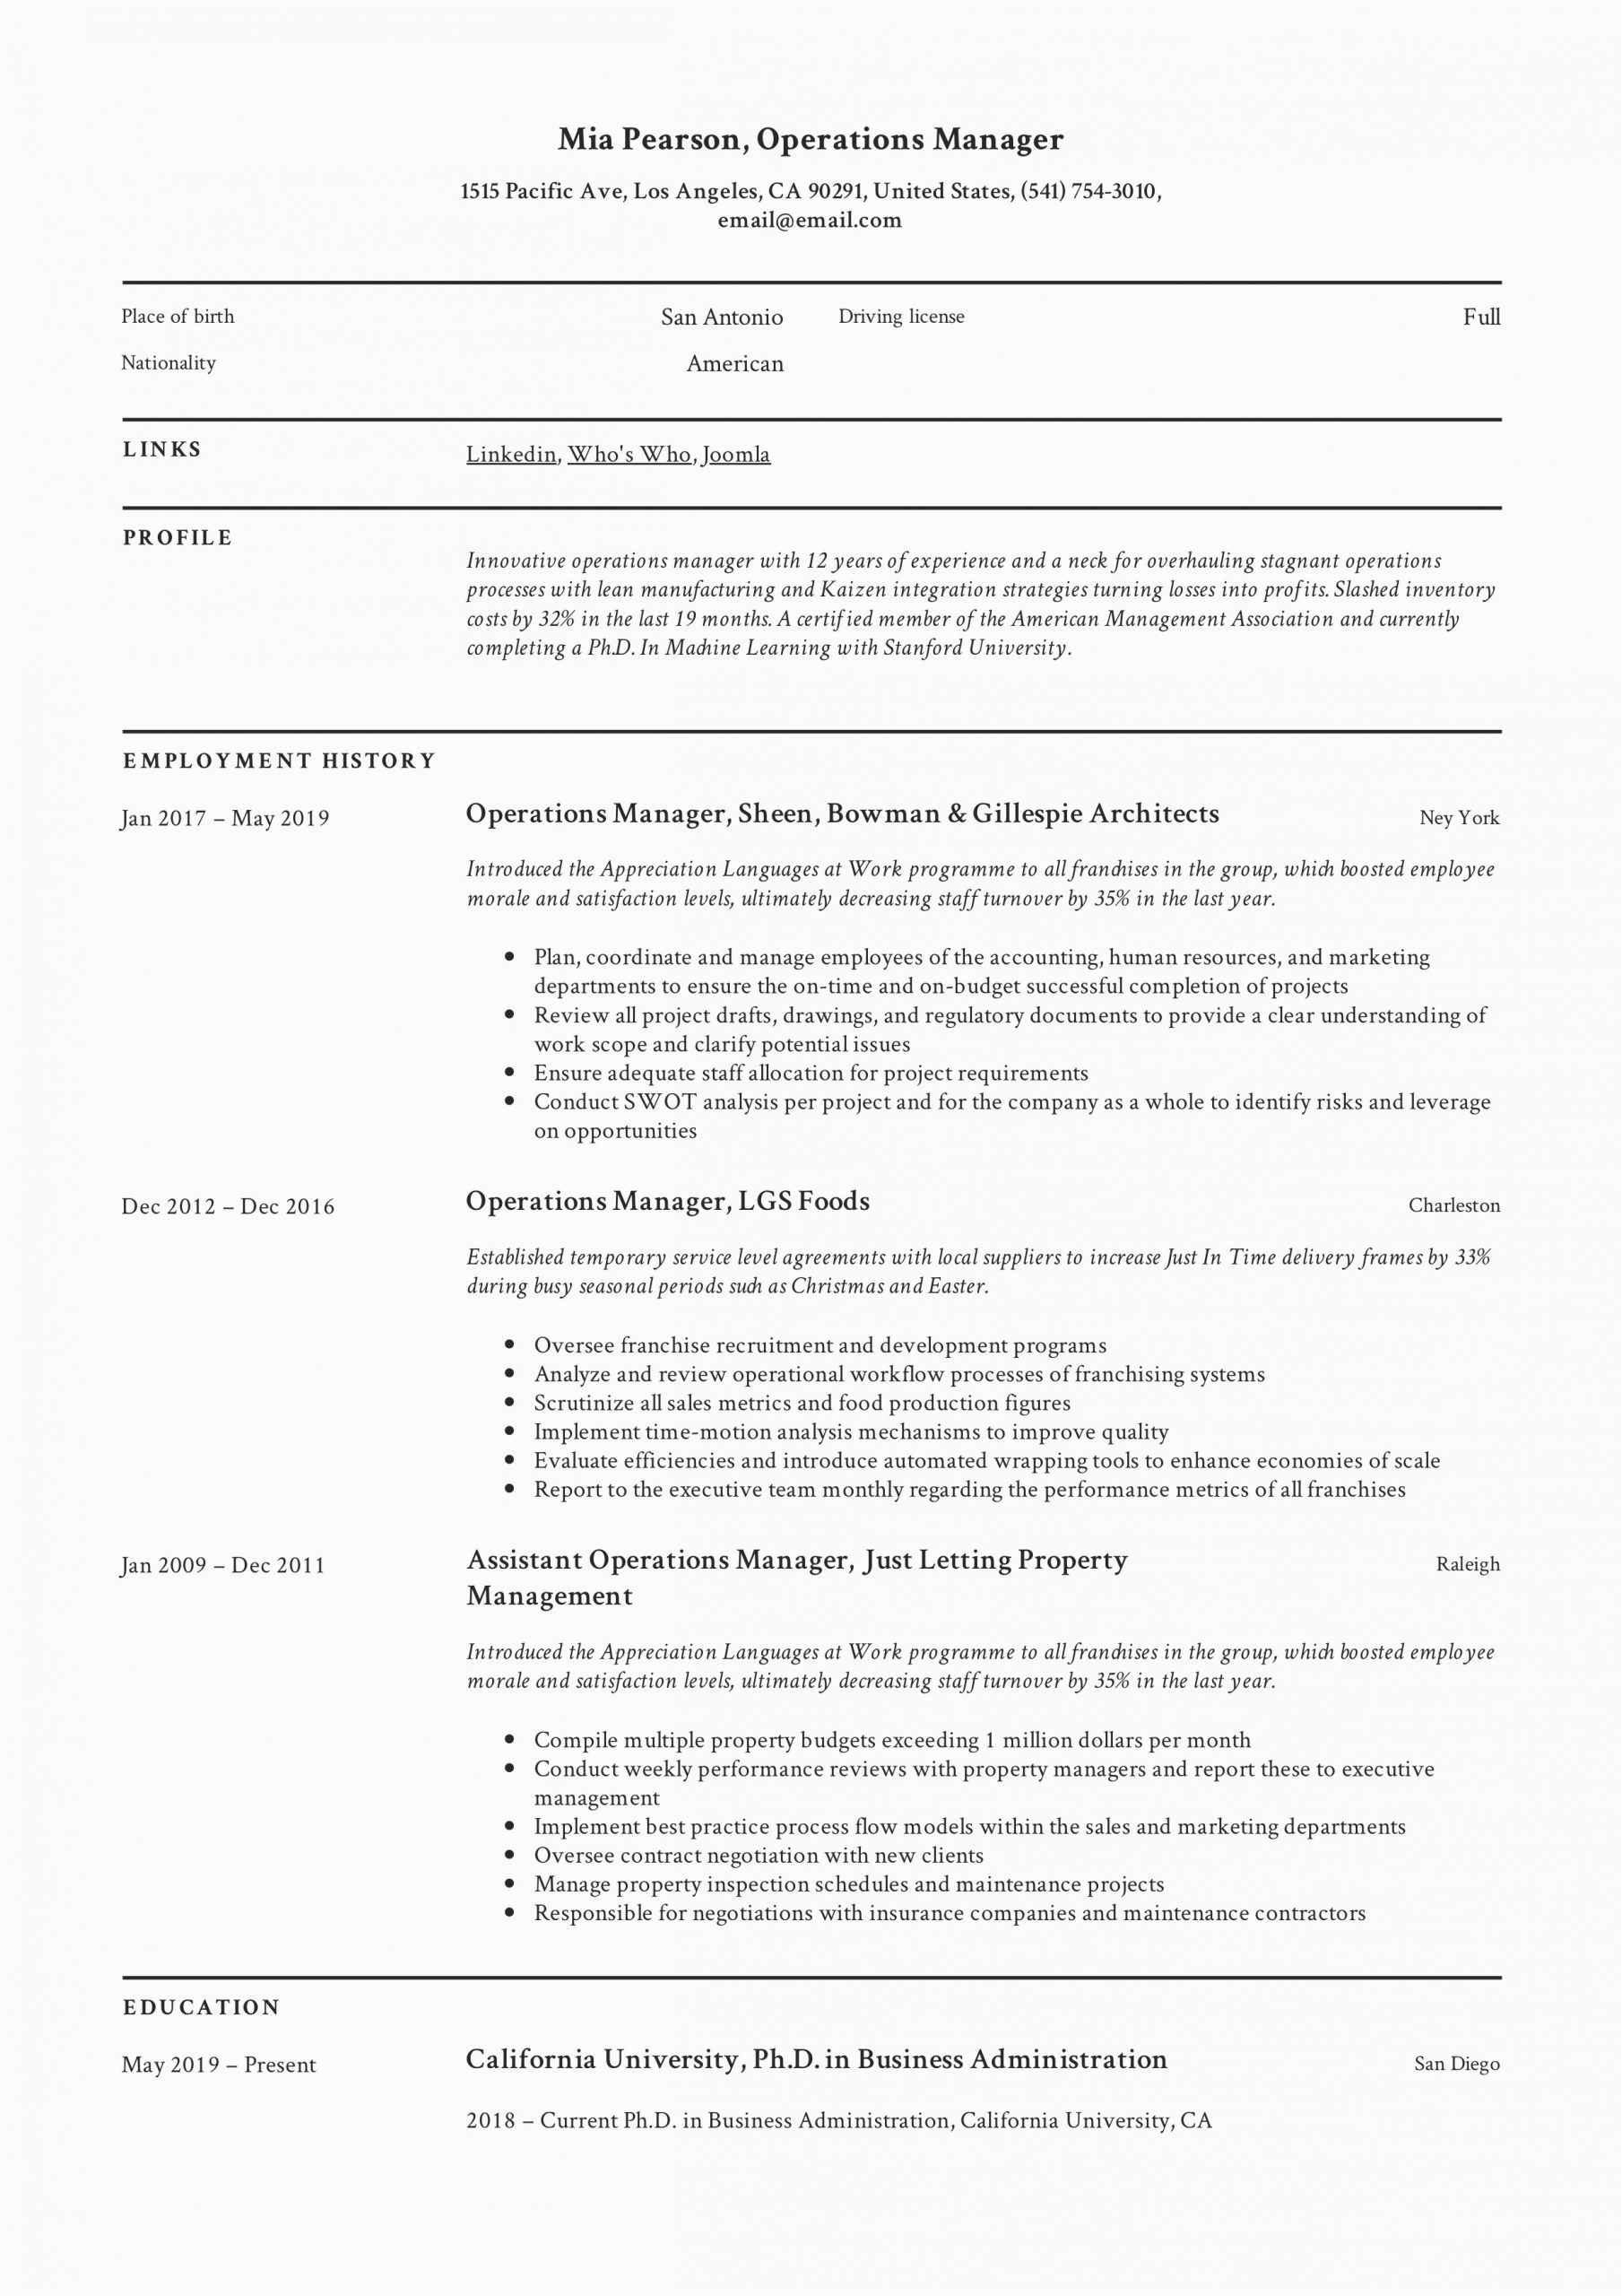 Resume Summary Sample for Operations Manager Operations Manager Resume & Writing Guide